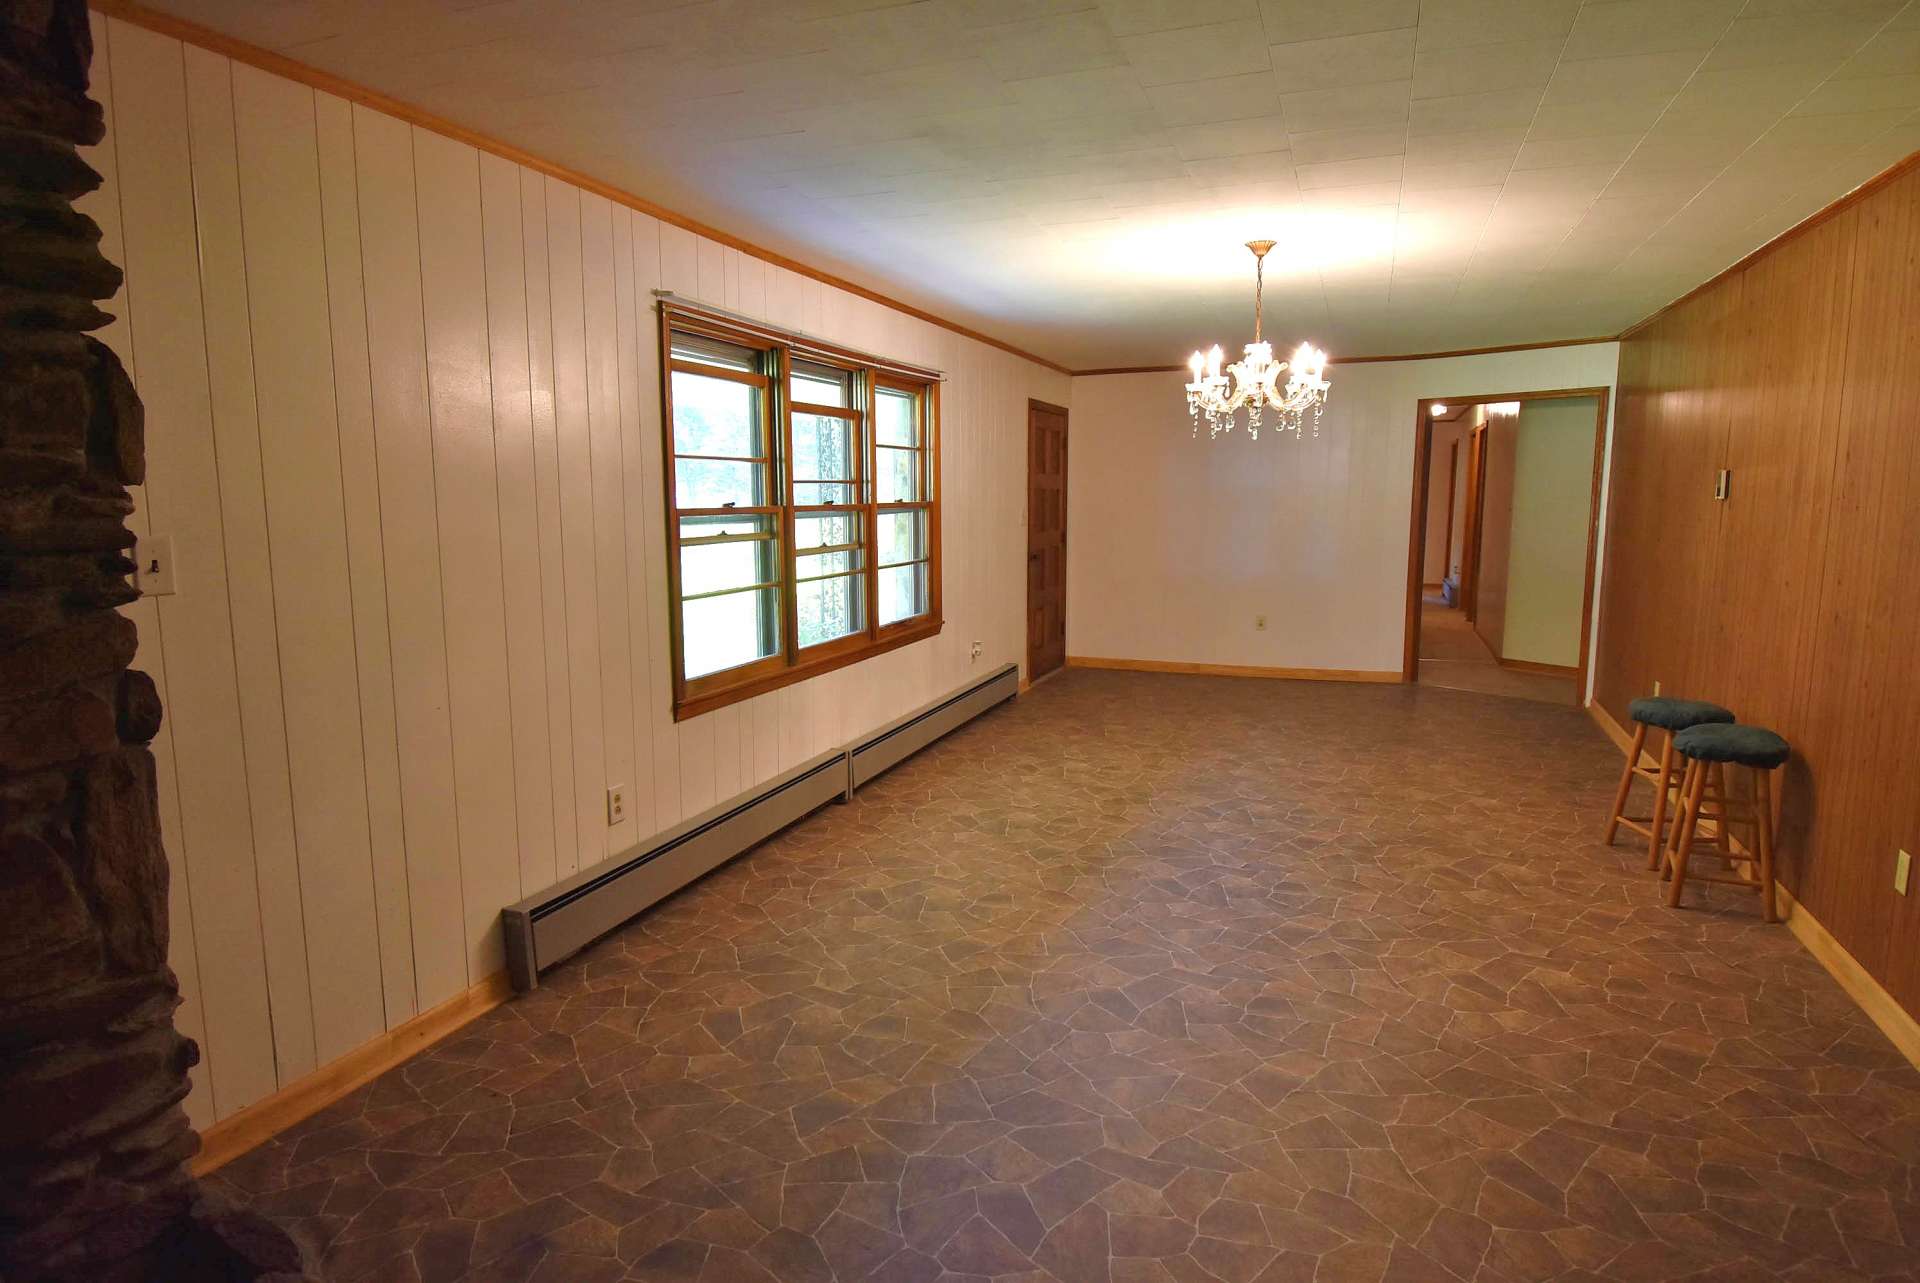 Lots of space for entertaining or spending time with friends and family.  This home is also handicap accessible.